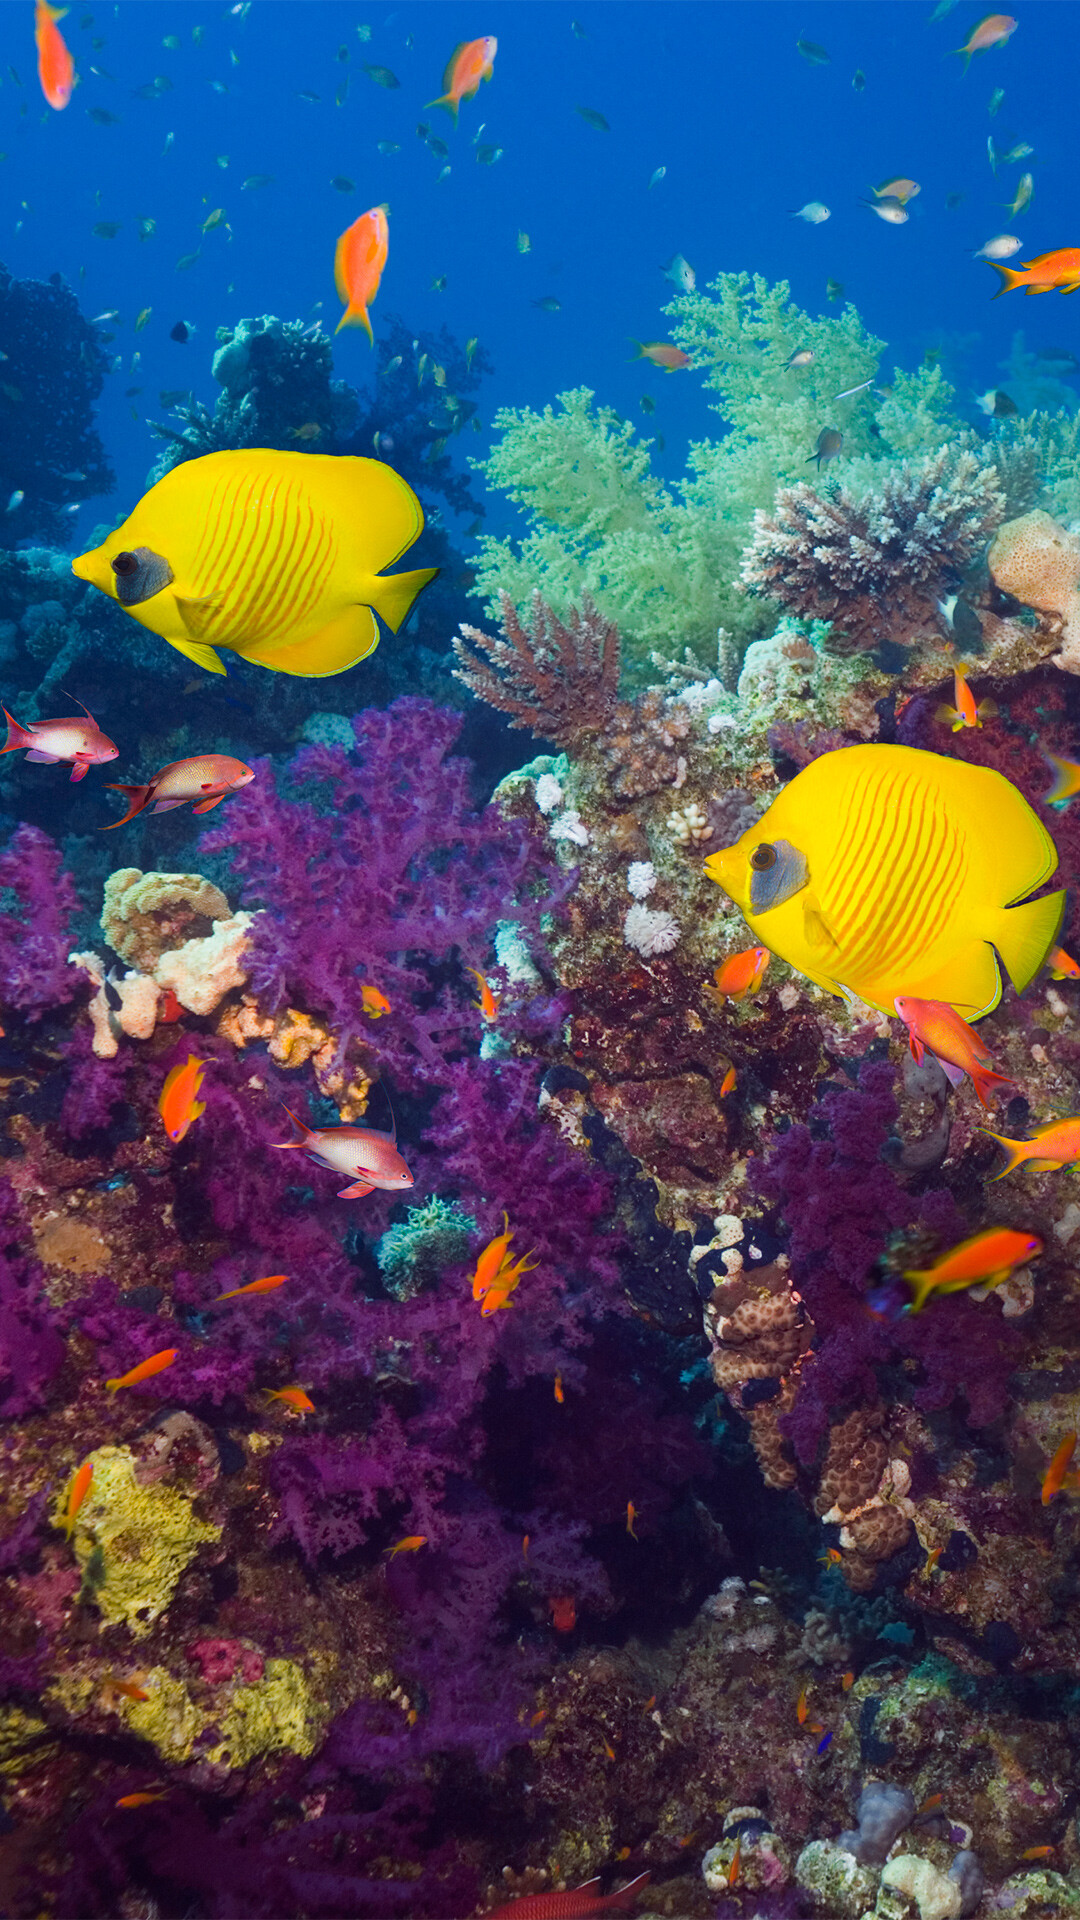 Coral Reef: Corals, Golden butterflyfish, Red Sea, Egypt. 1080x1920 Full HD Wallpaper.